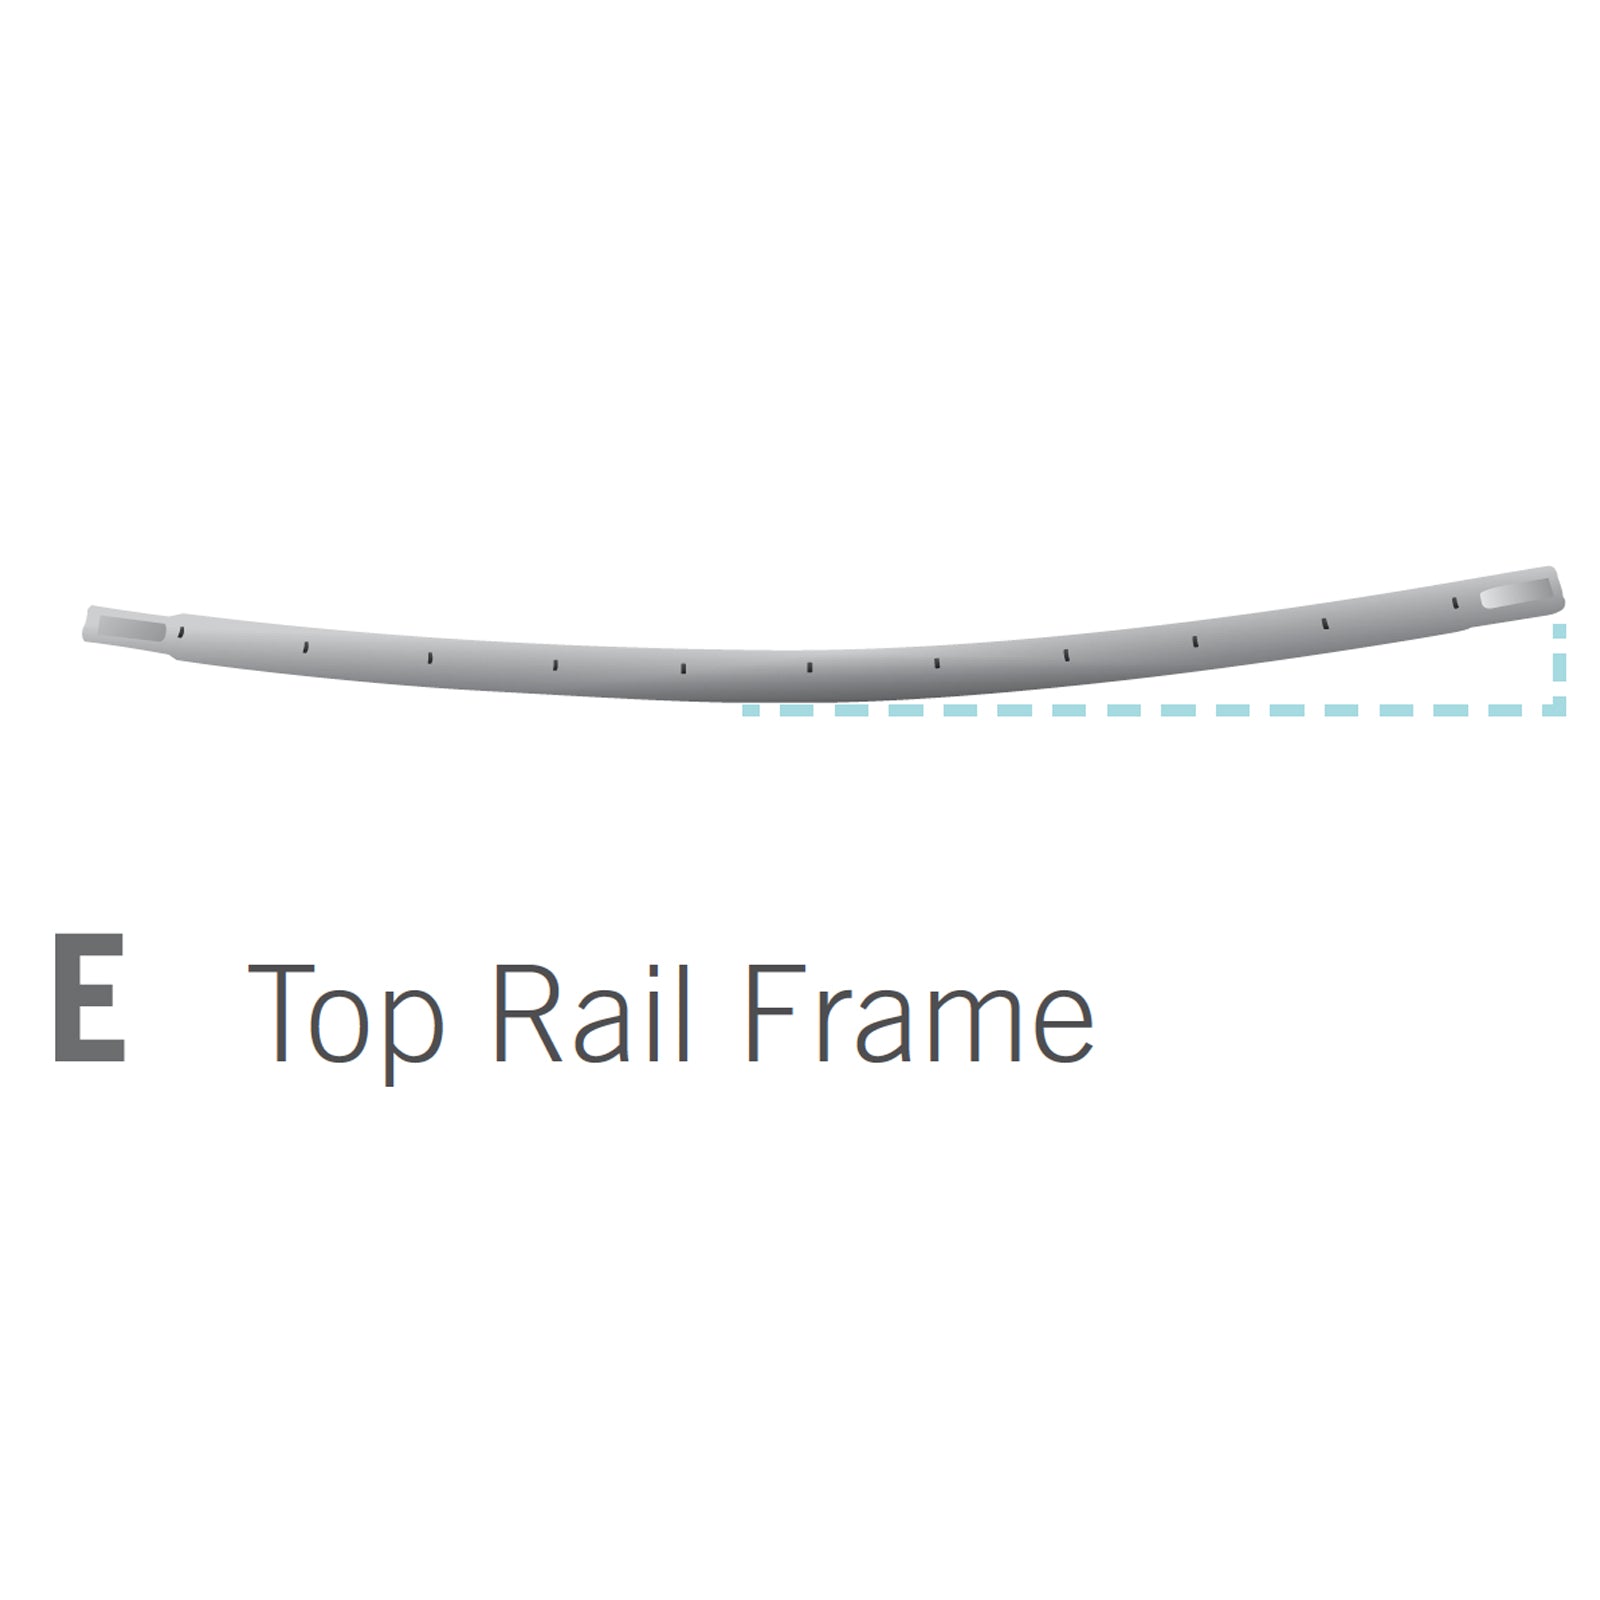 Top Rail for 11x16 foot Orion Trampoline (Part E).